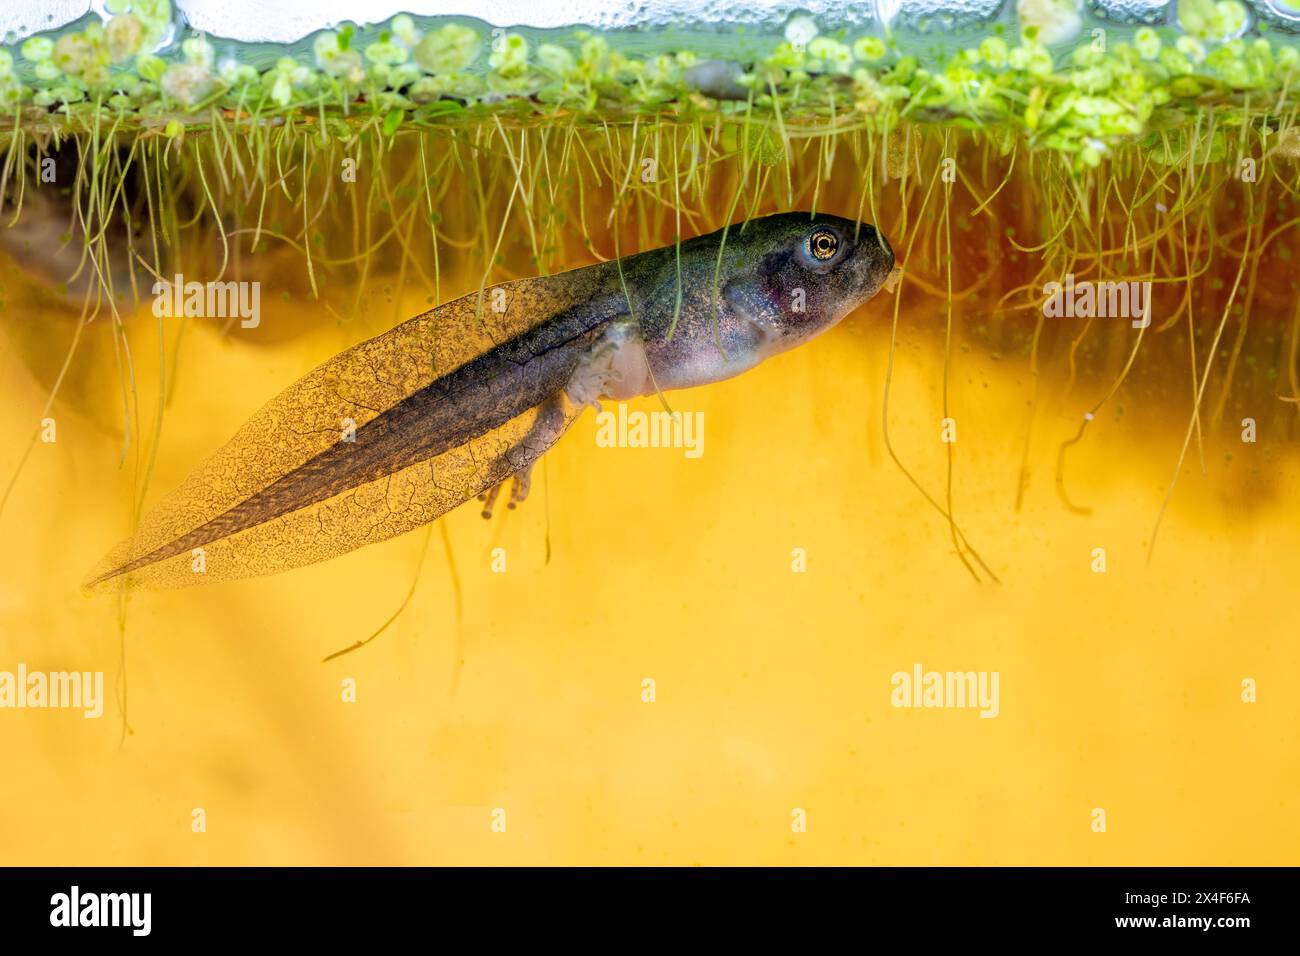 Issaquah, Washington State, USA. Pacific tree frog tadpole with hind legs eating duckweed in an aquarium. Stock Photo